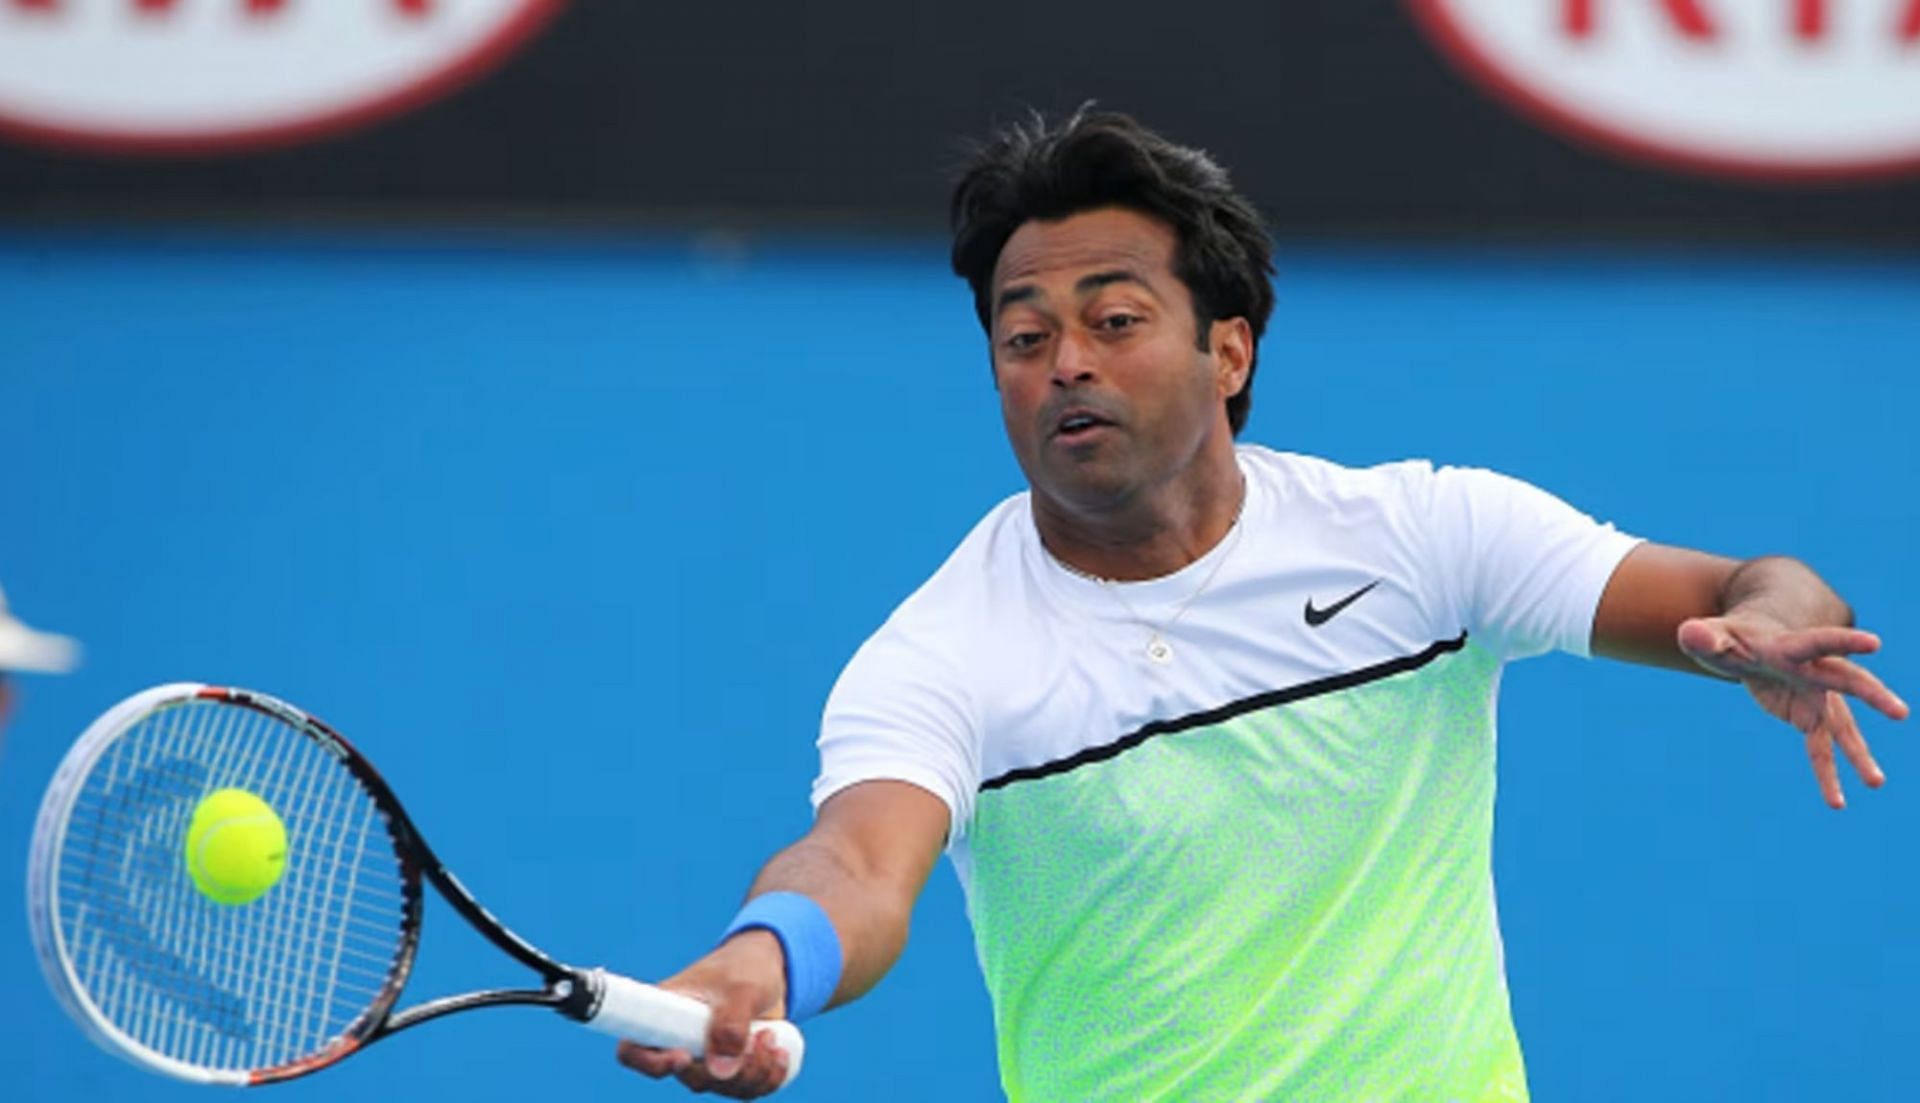 Leander Paes to exhibit his trophies in International Tennis Hall of Fame